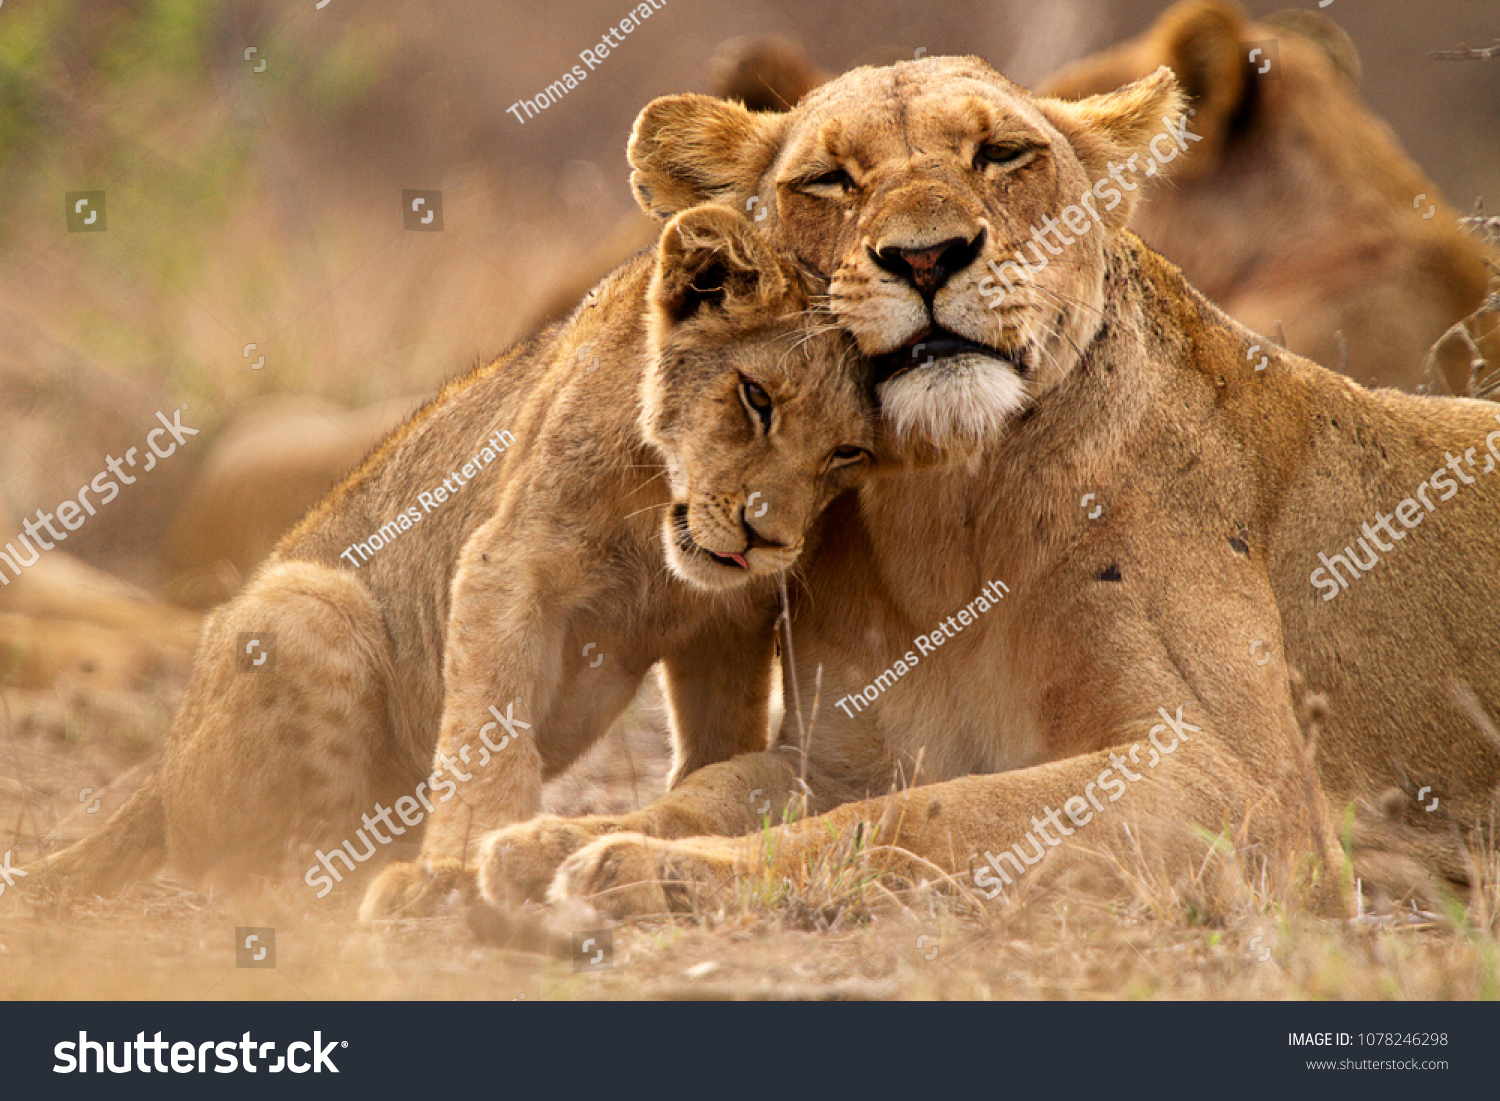 Predator´s love. Lioness and cub in the Kruger NP, South Africa #1078246298